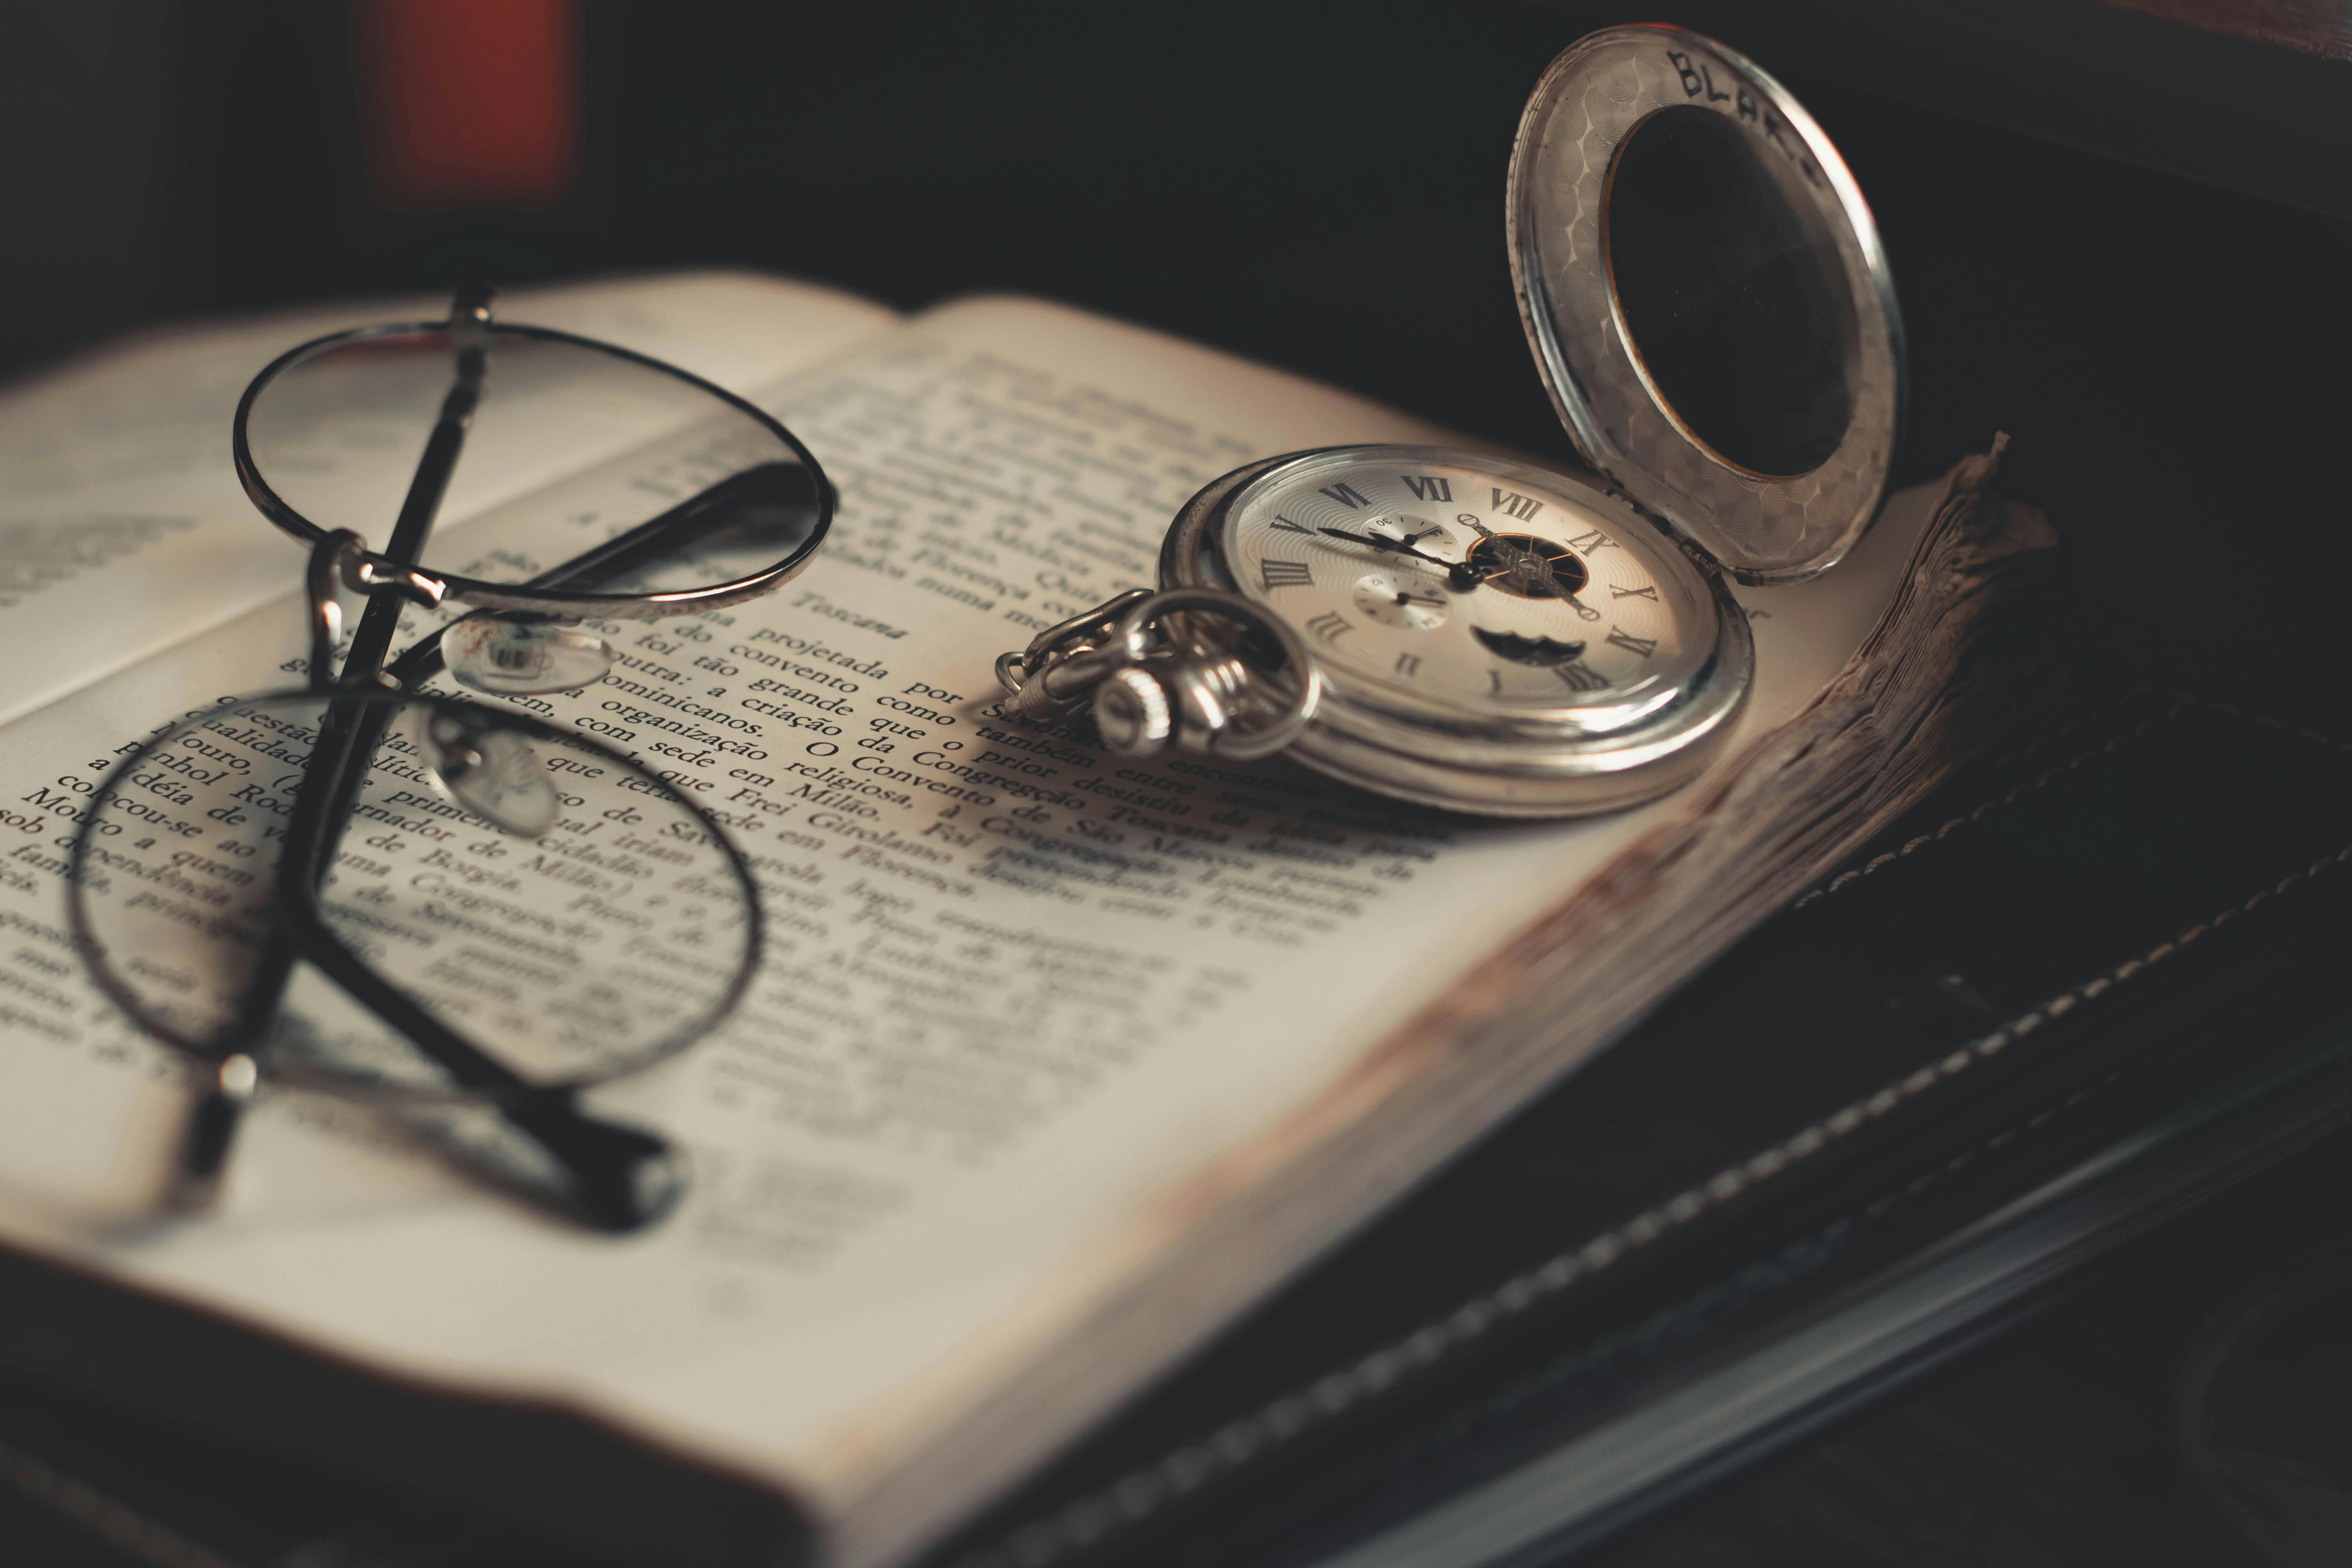 Round Silver-Colored Pocket Watch and Eyeglasses on Opened Book